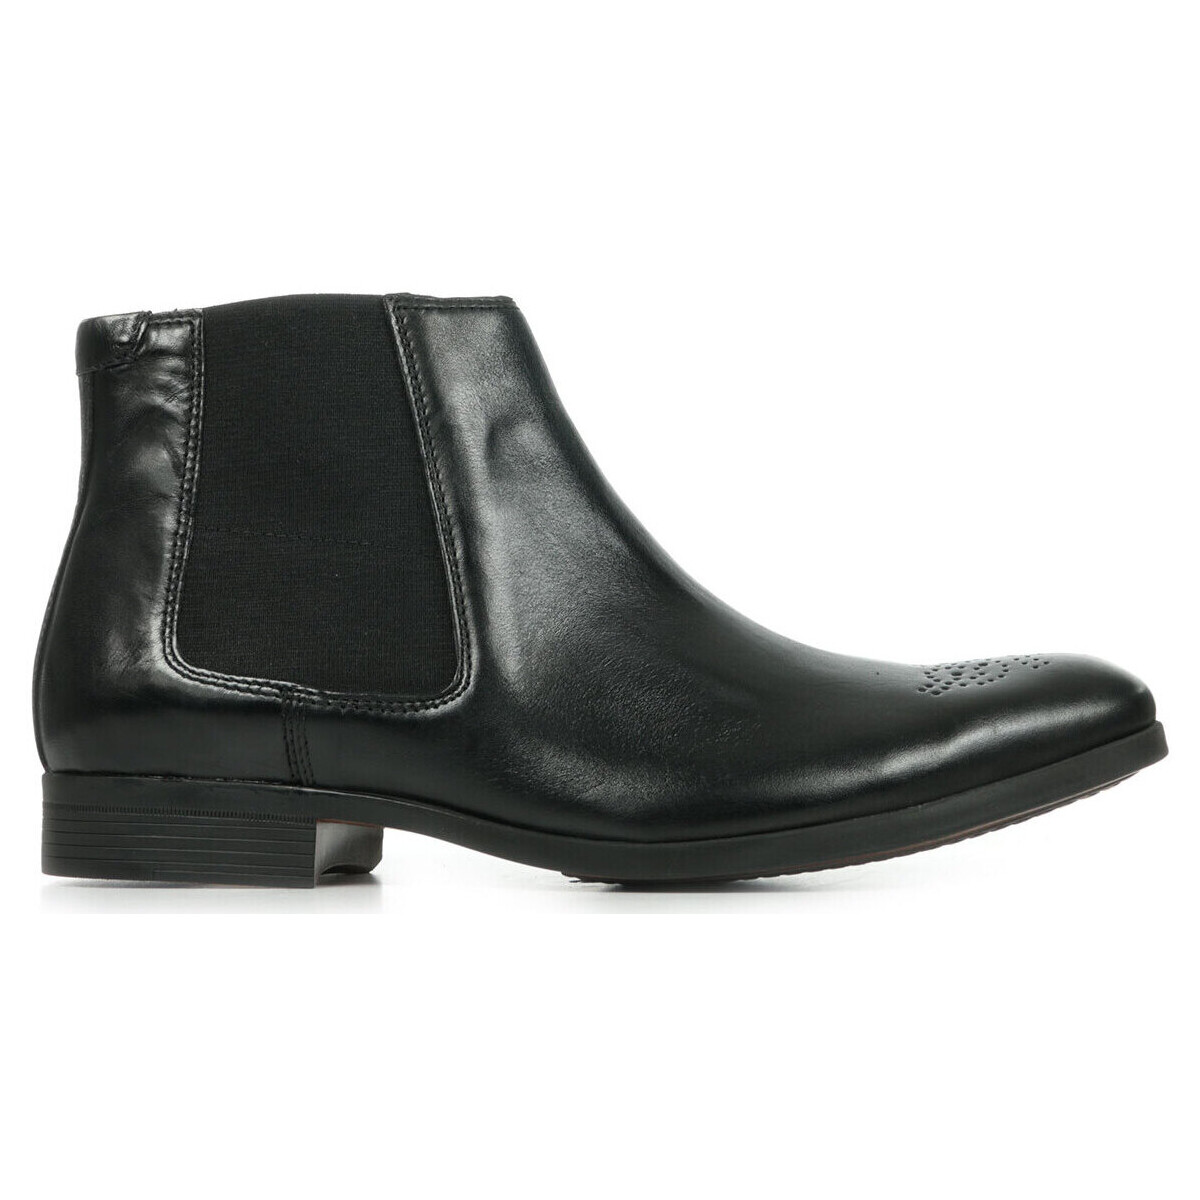 Chaussures Homme Boots Clarks Gilmore Chelsea Noir